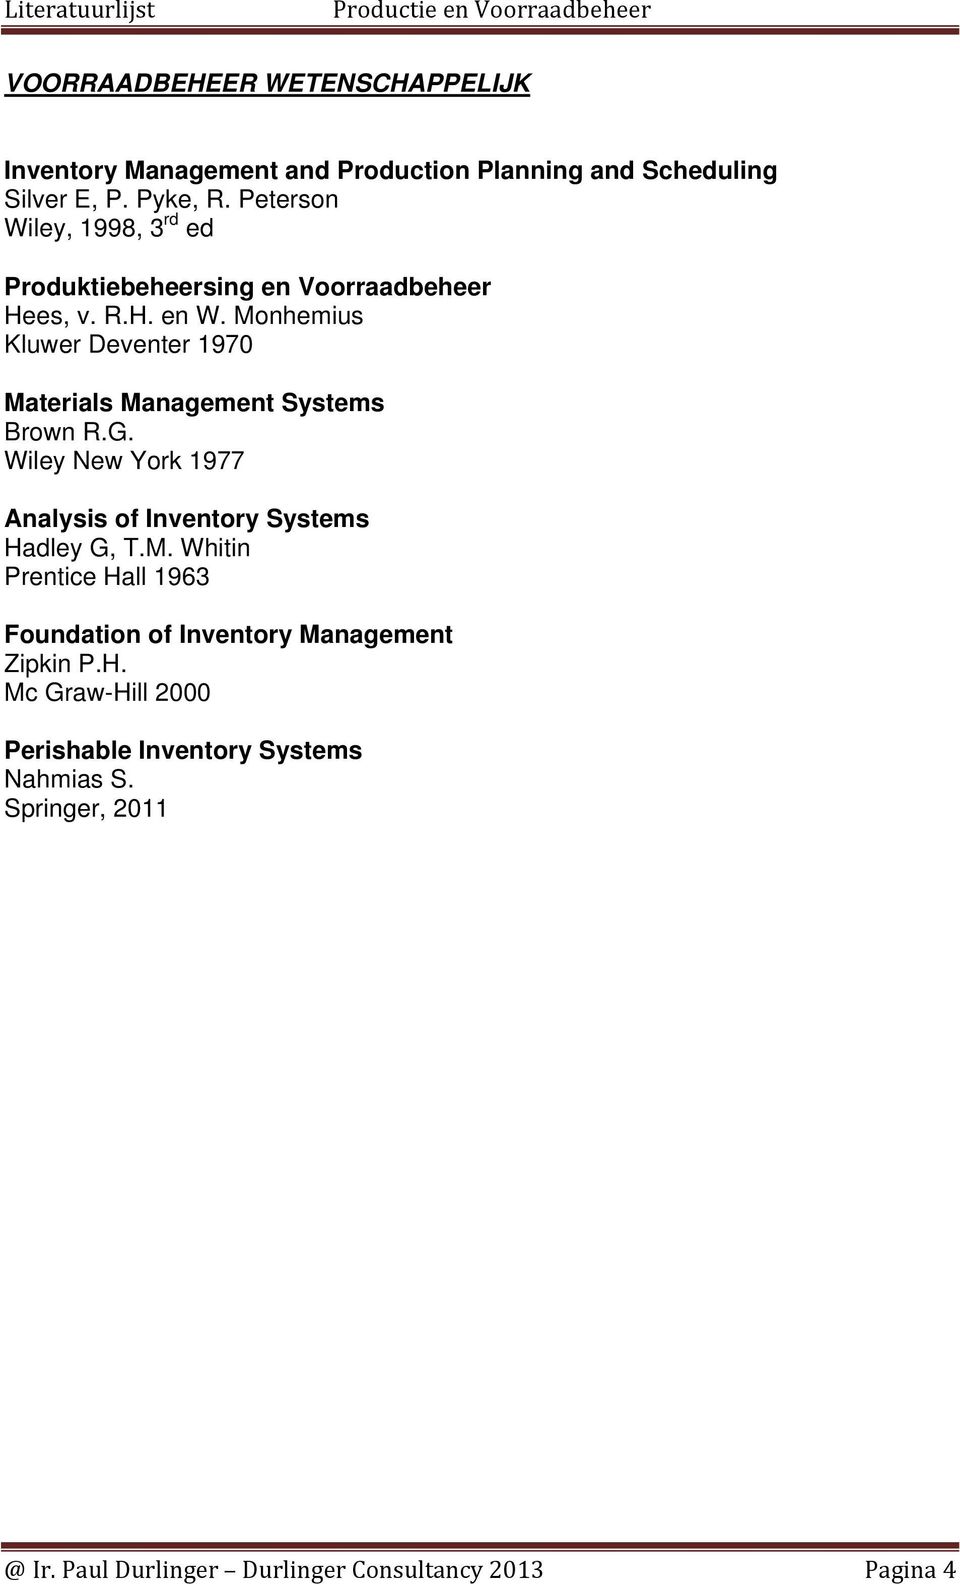 Monhemius Kluwer Deventer 1970 Materials Management Systems Brown R.G. Wiley New York 1977 Analysis of Inventory Systems Hadley G, T.M. Whitin Prentice Hall 1963 Foundation of Inventory Management Zipkin P.